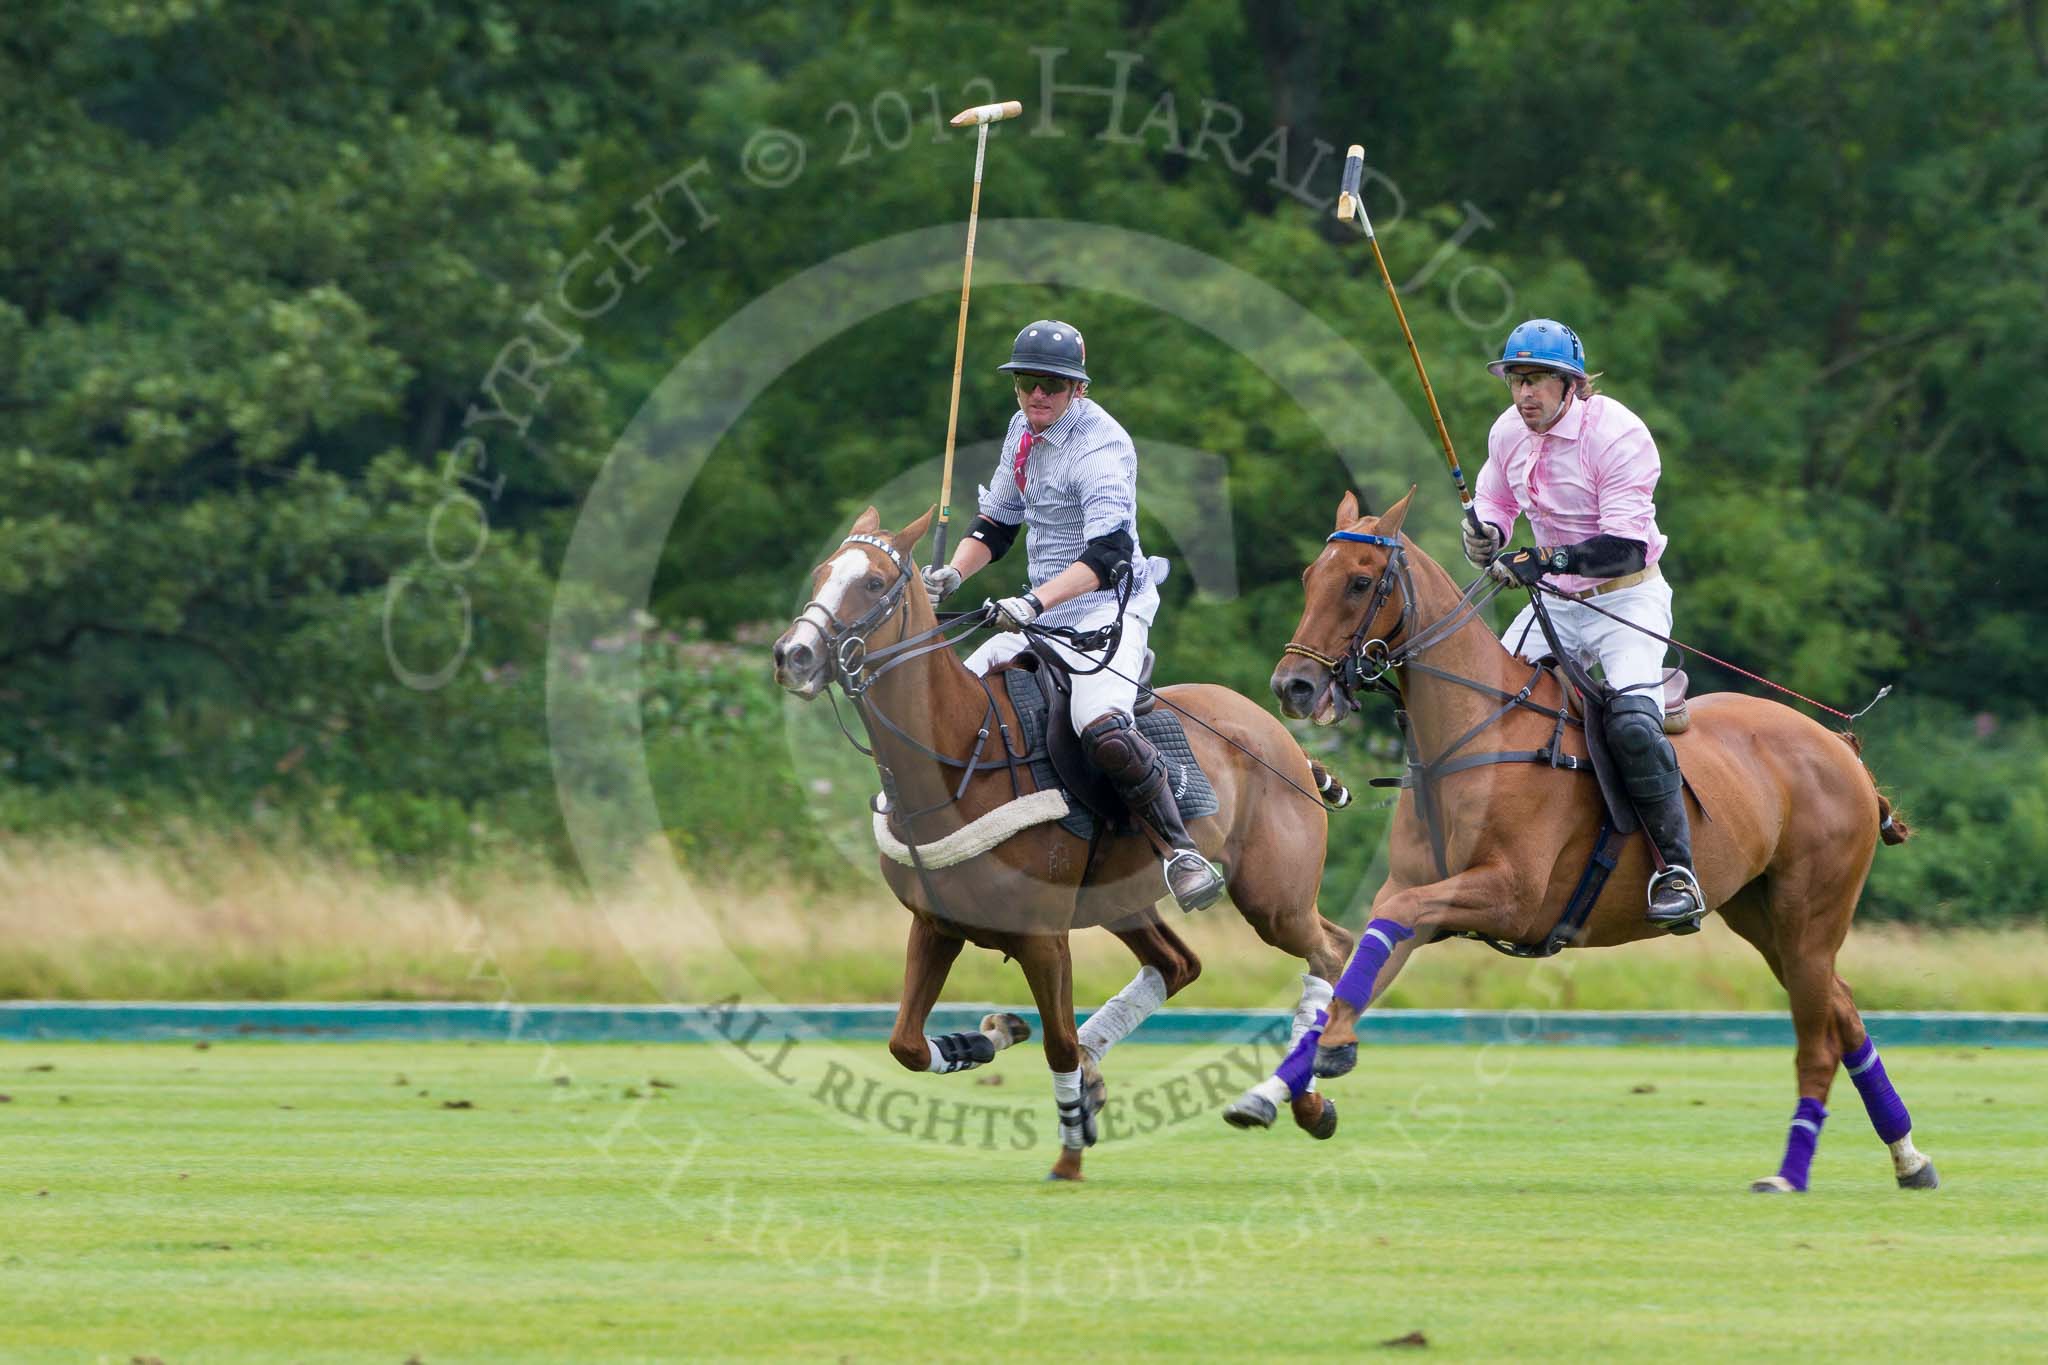 7th Heritage Polo Cup semi-finals: Justo Saveedra, Team Emerging Switzerland, v Henry Fisherr, Team Silver Fox USA..
Hurtwood Park Polo Club,
Ewhurst Green,
Surrey,
United Kingdom,
on 04 August 2012 at 11:33, image #55